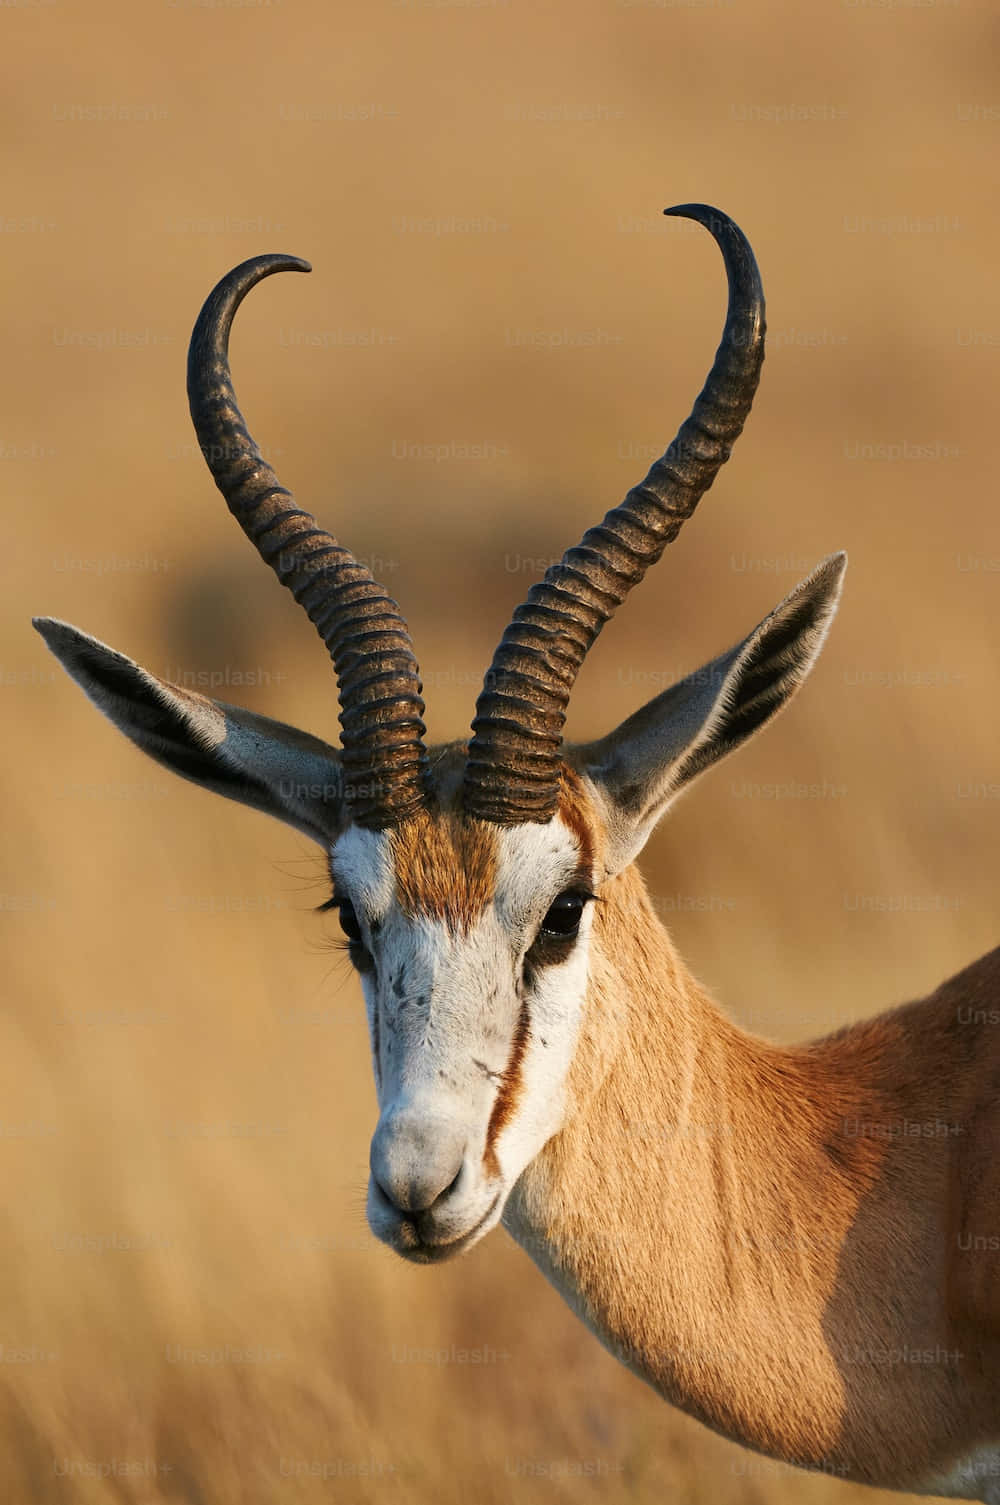 Gazelle Portraitwith Curved Horns Wallpaper